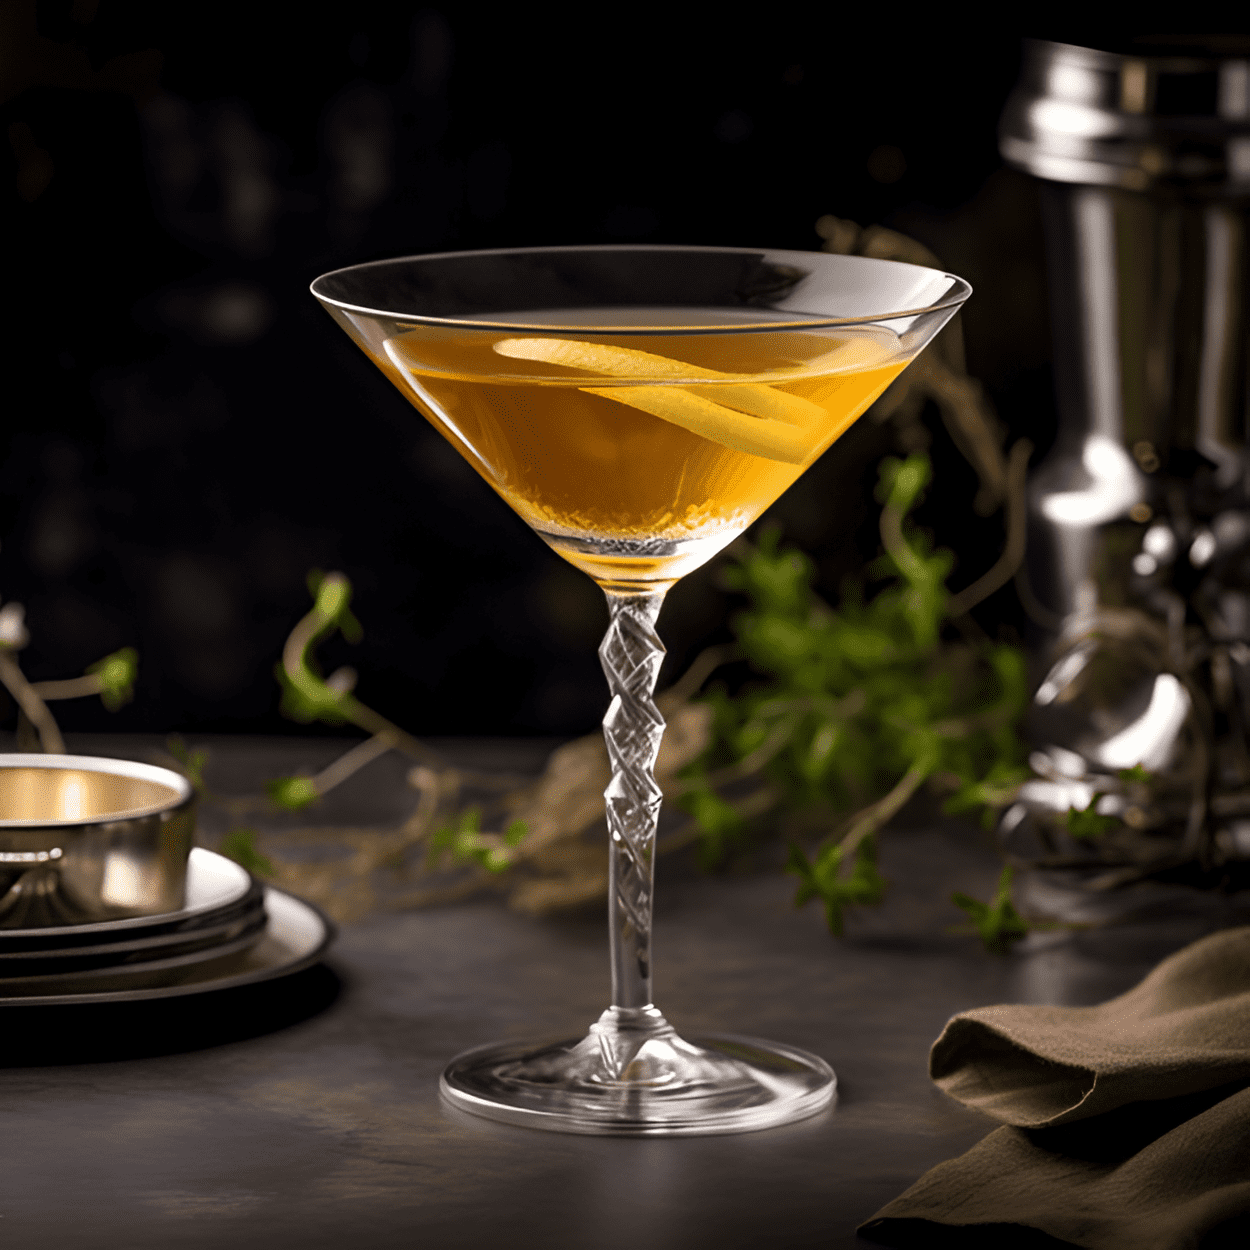 Sicilian Kiss Cocktail Recipe - The Sicilian Kiss is a sweet, smooth, and slightly nutty cocktail. The Southern Comfort provides a sweet and fruity base, while the Amaretto adds a rich, nutty flavor. The combination of these two ingredients creates a beautifully balanced and delicious cocktail.